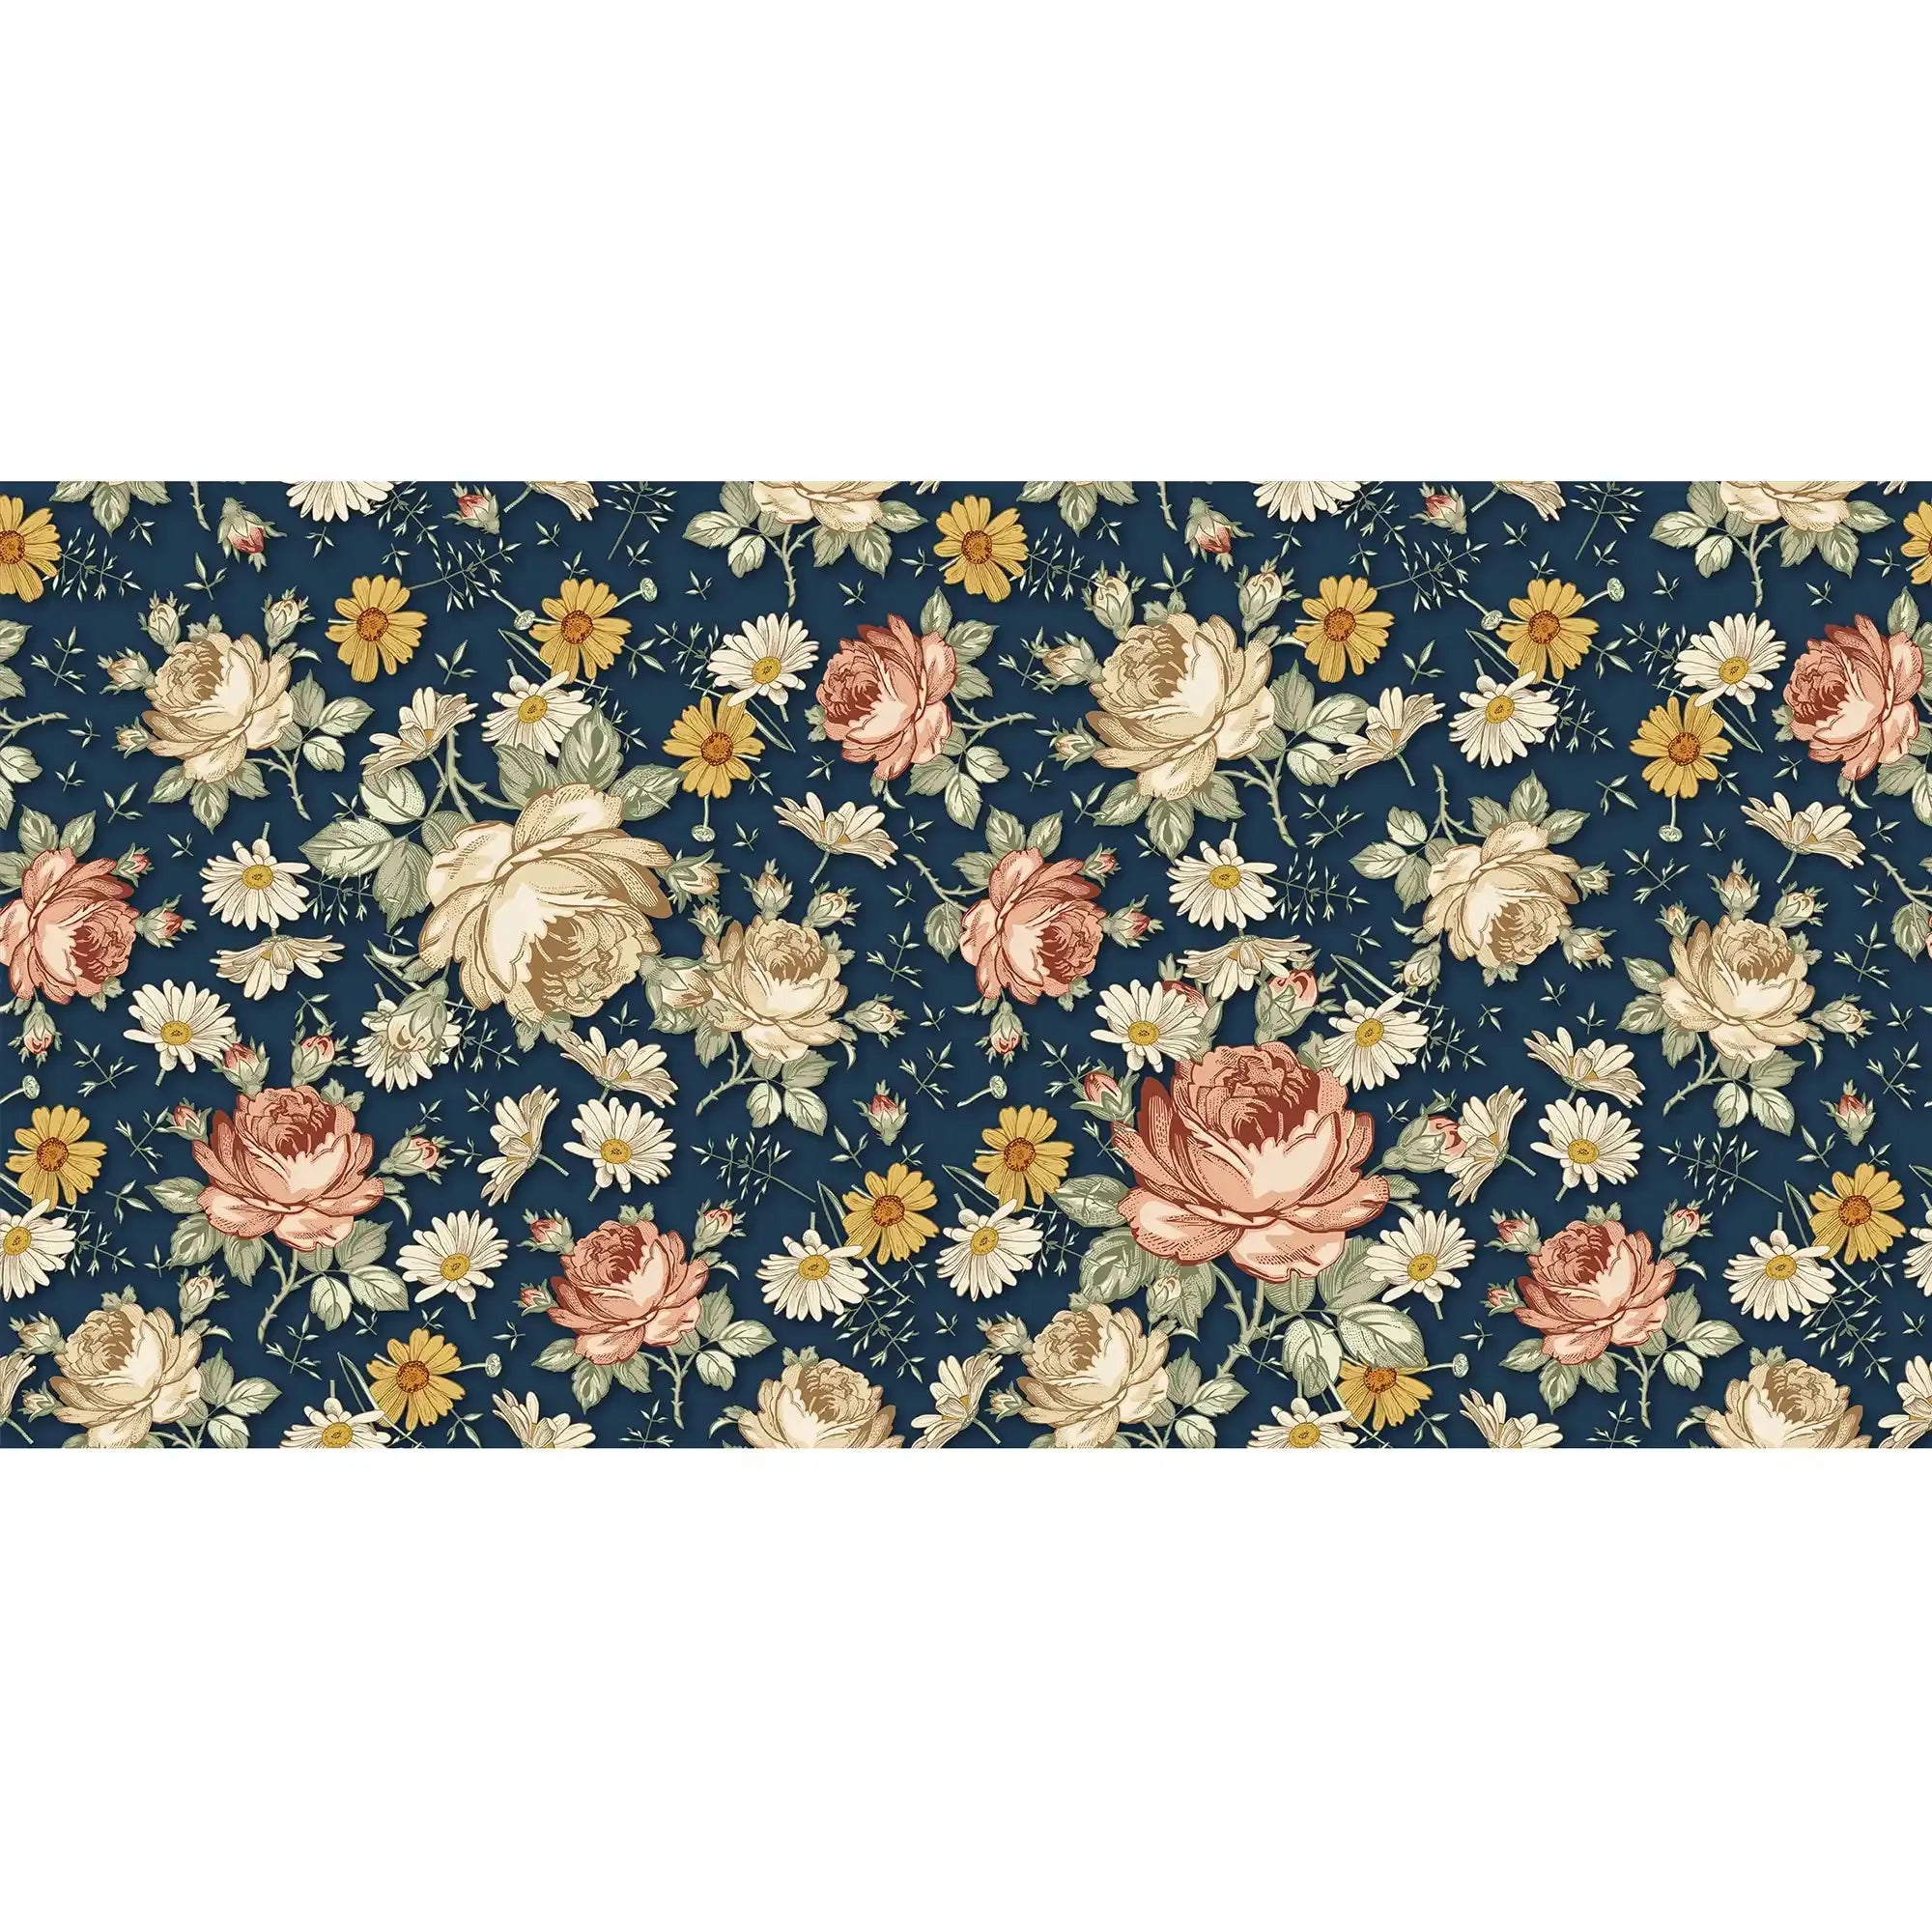 3097-A / Removable Wallpaper Peel and Stick, Floral & Geometric Pattern Wallpaper with Daisies for Room Decor - Artevella